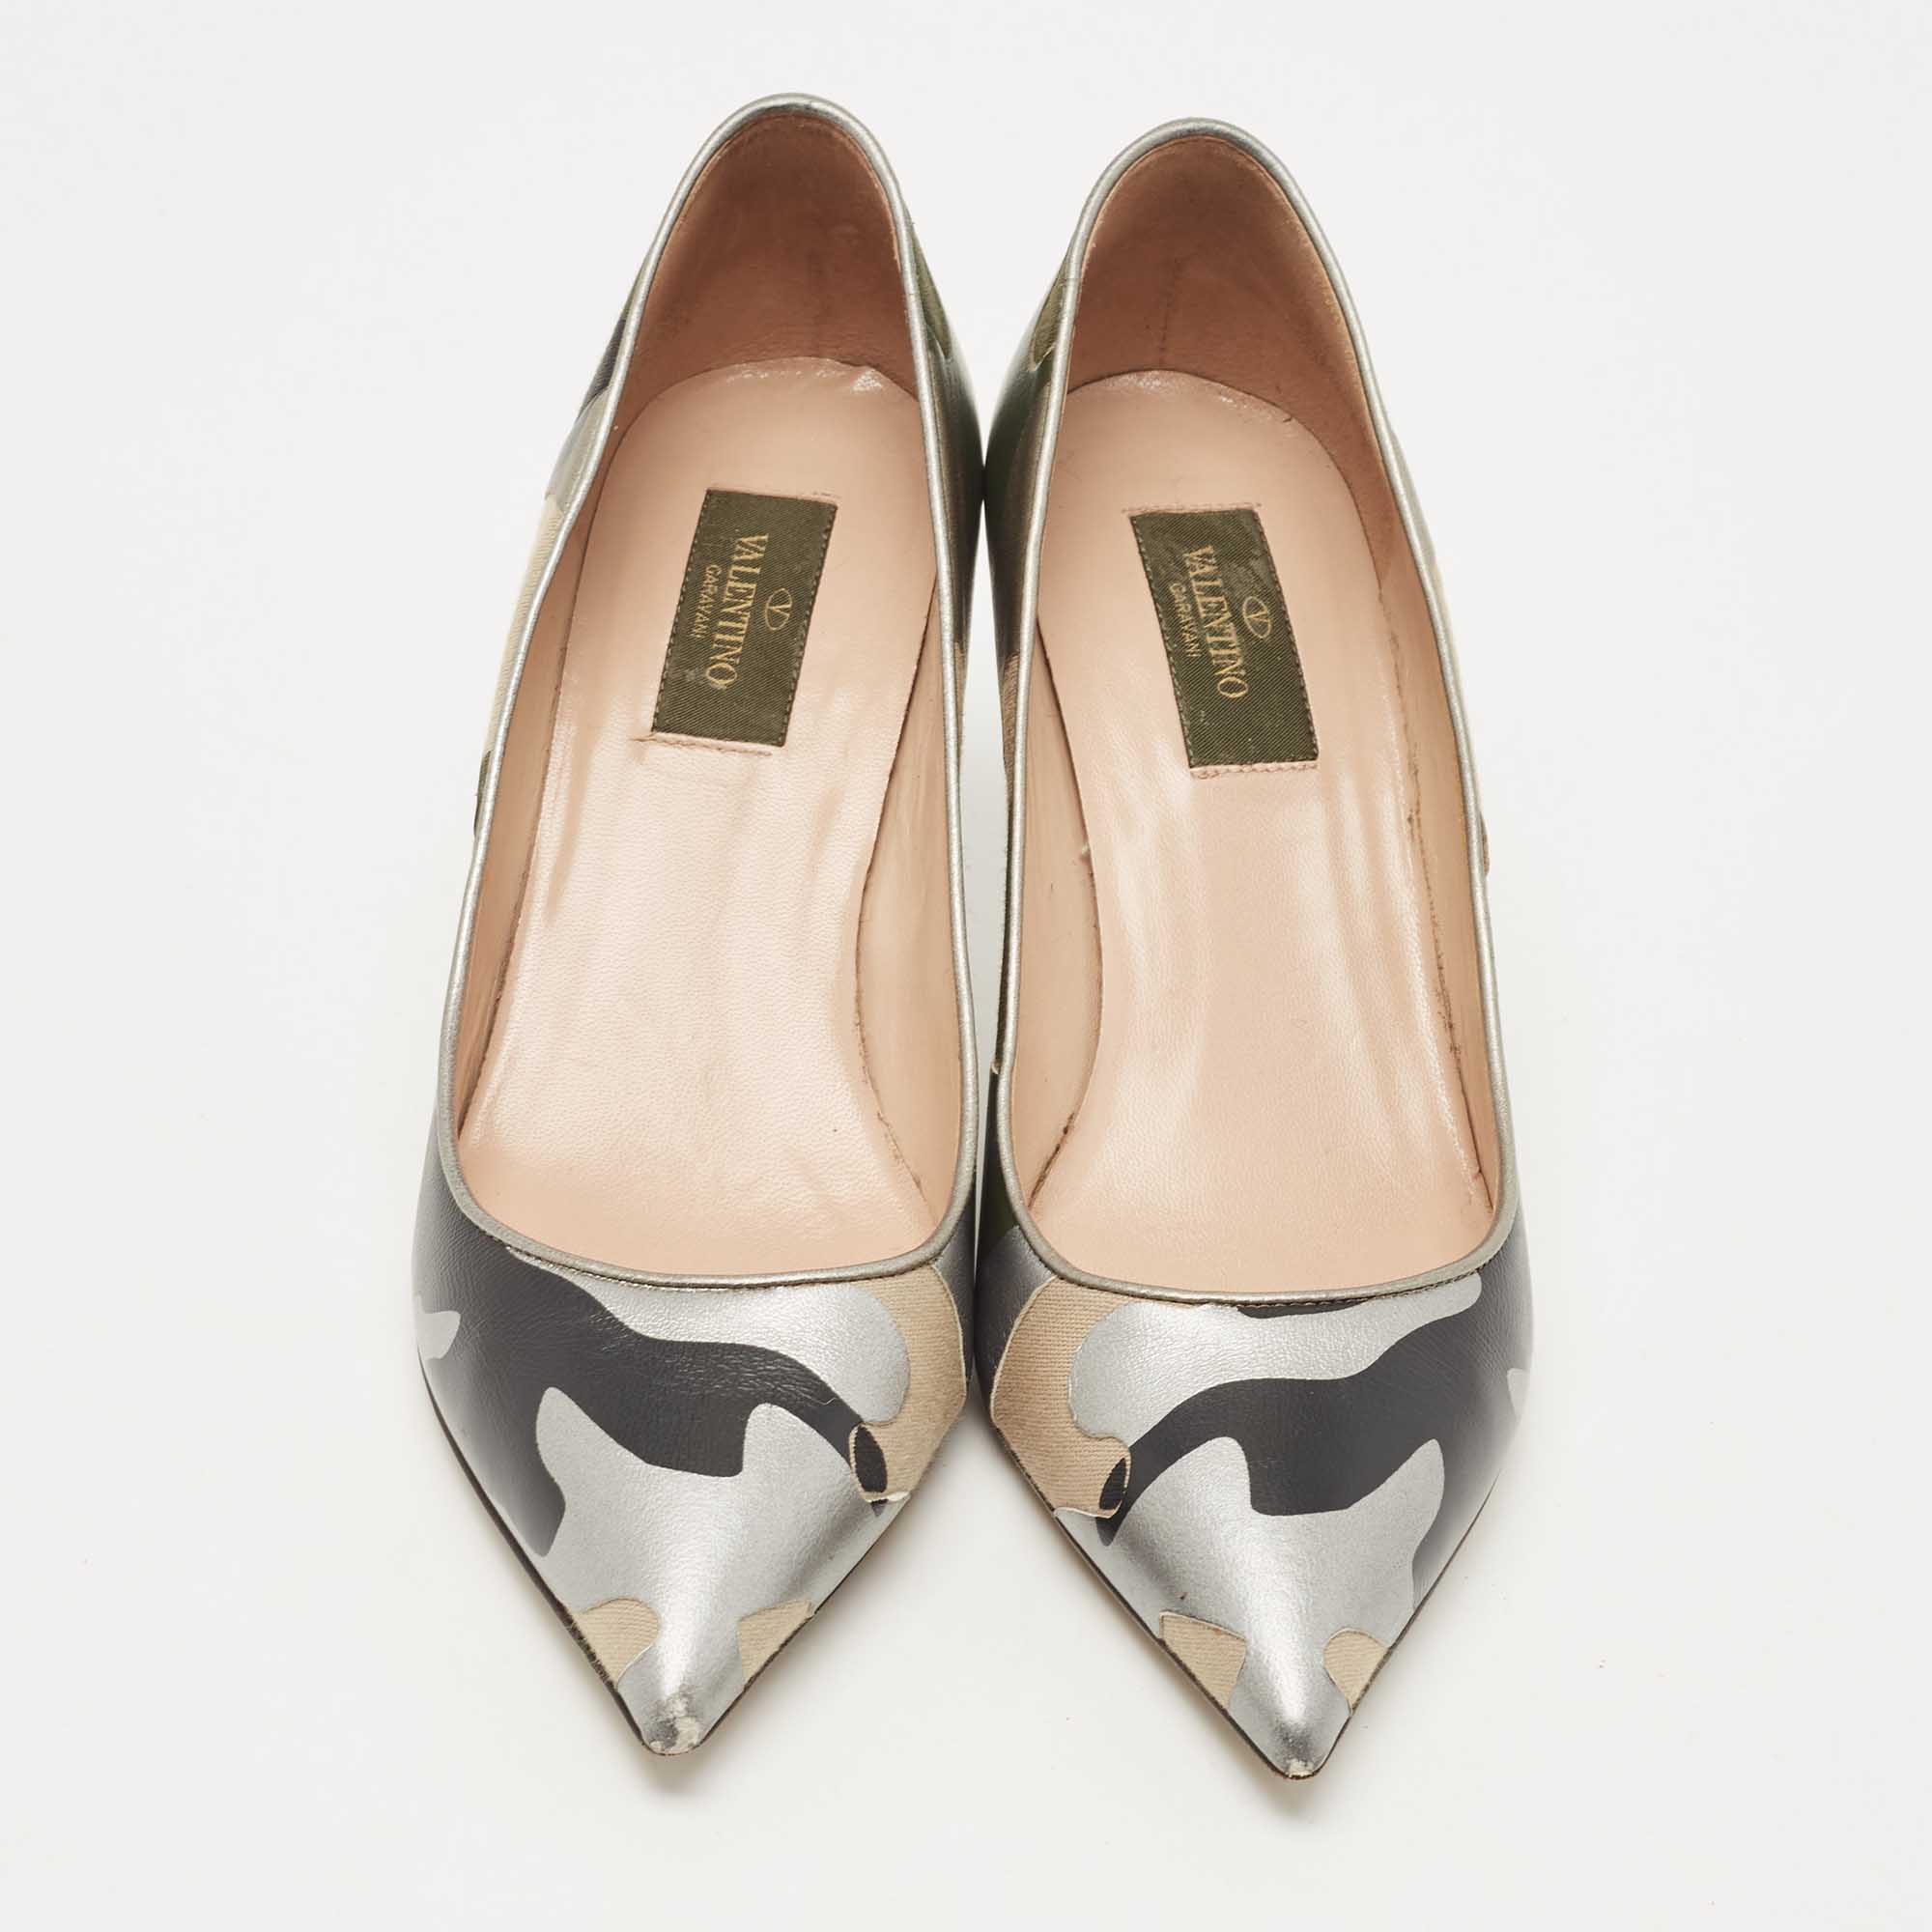 Valentino Tricolor Camo Print Leather And Canvas Pointed Toe Pumps Size 38.5